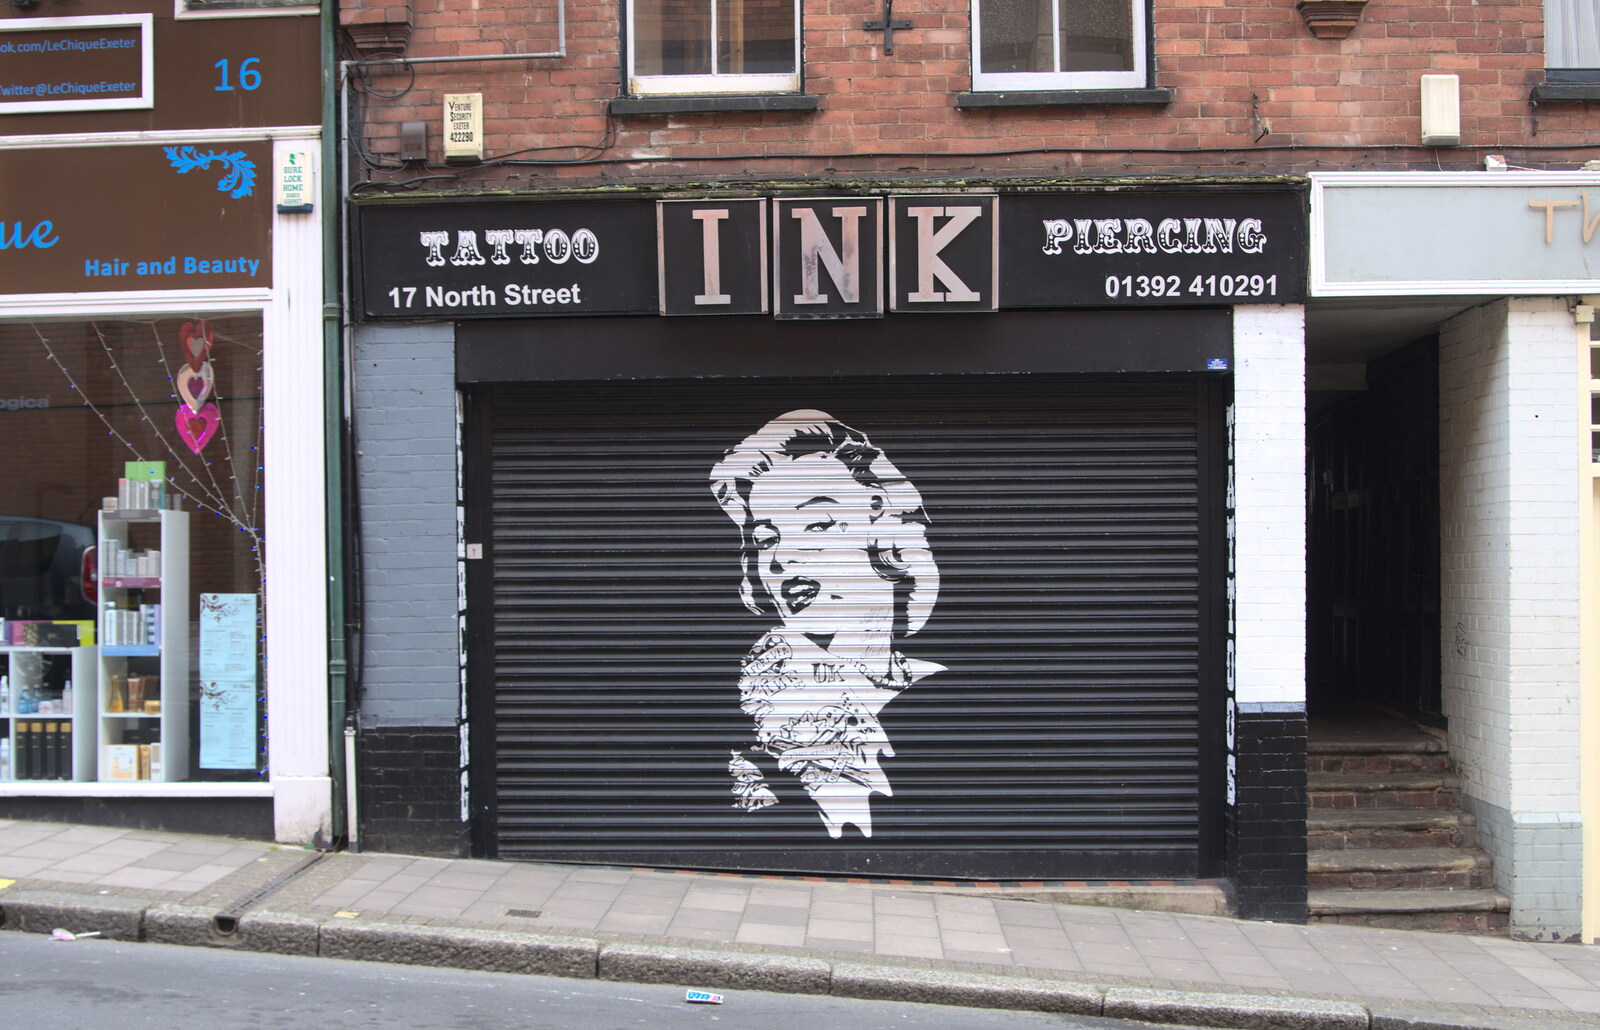 Marilyn Monroe on a tattoo-shop roller blind from A Barbeque, Grimspound and Pizza, Dartmoor and Exeter, Devon - 15th April 2017